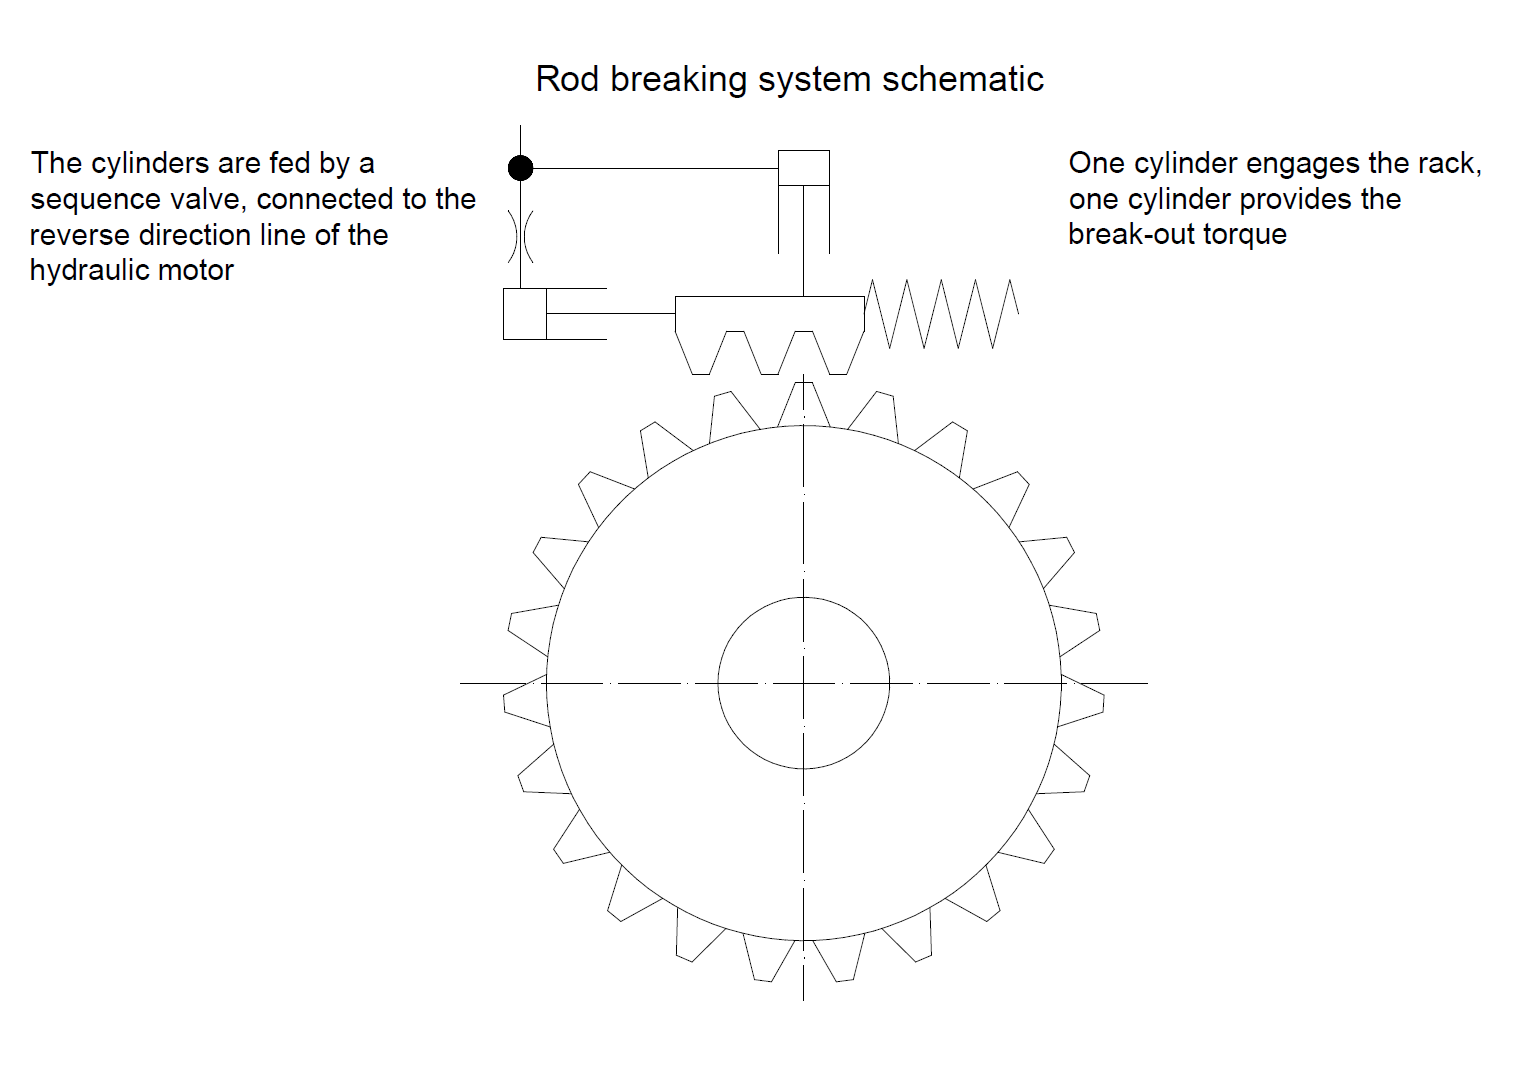 Rod break-out system schematic